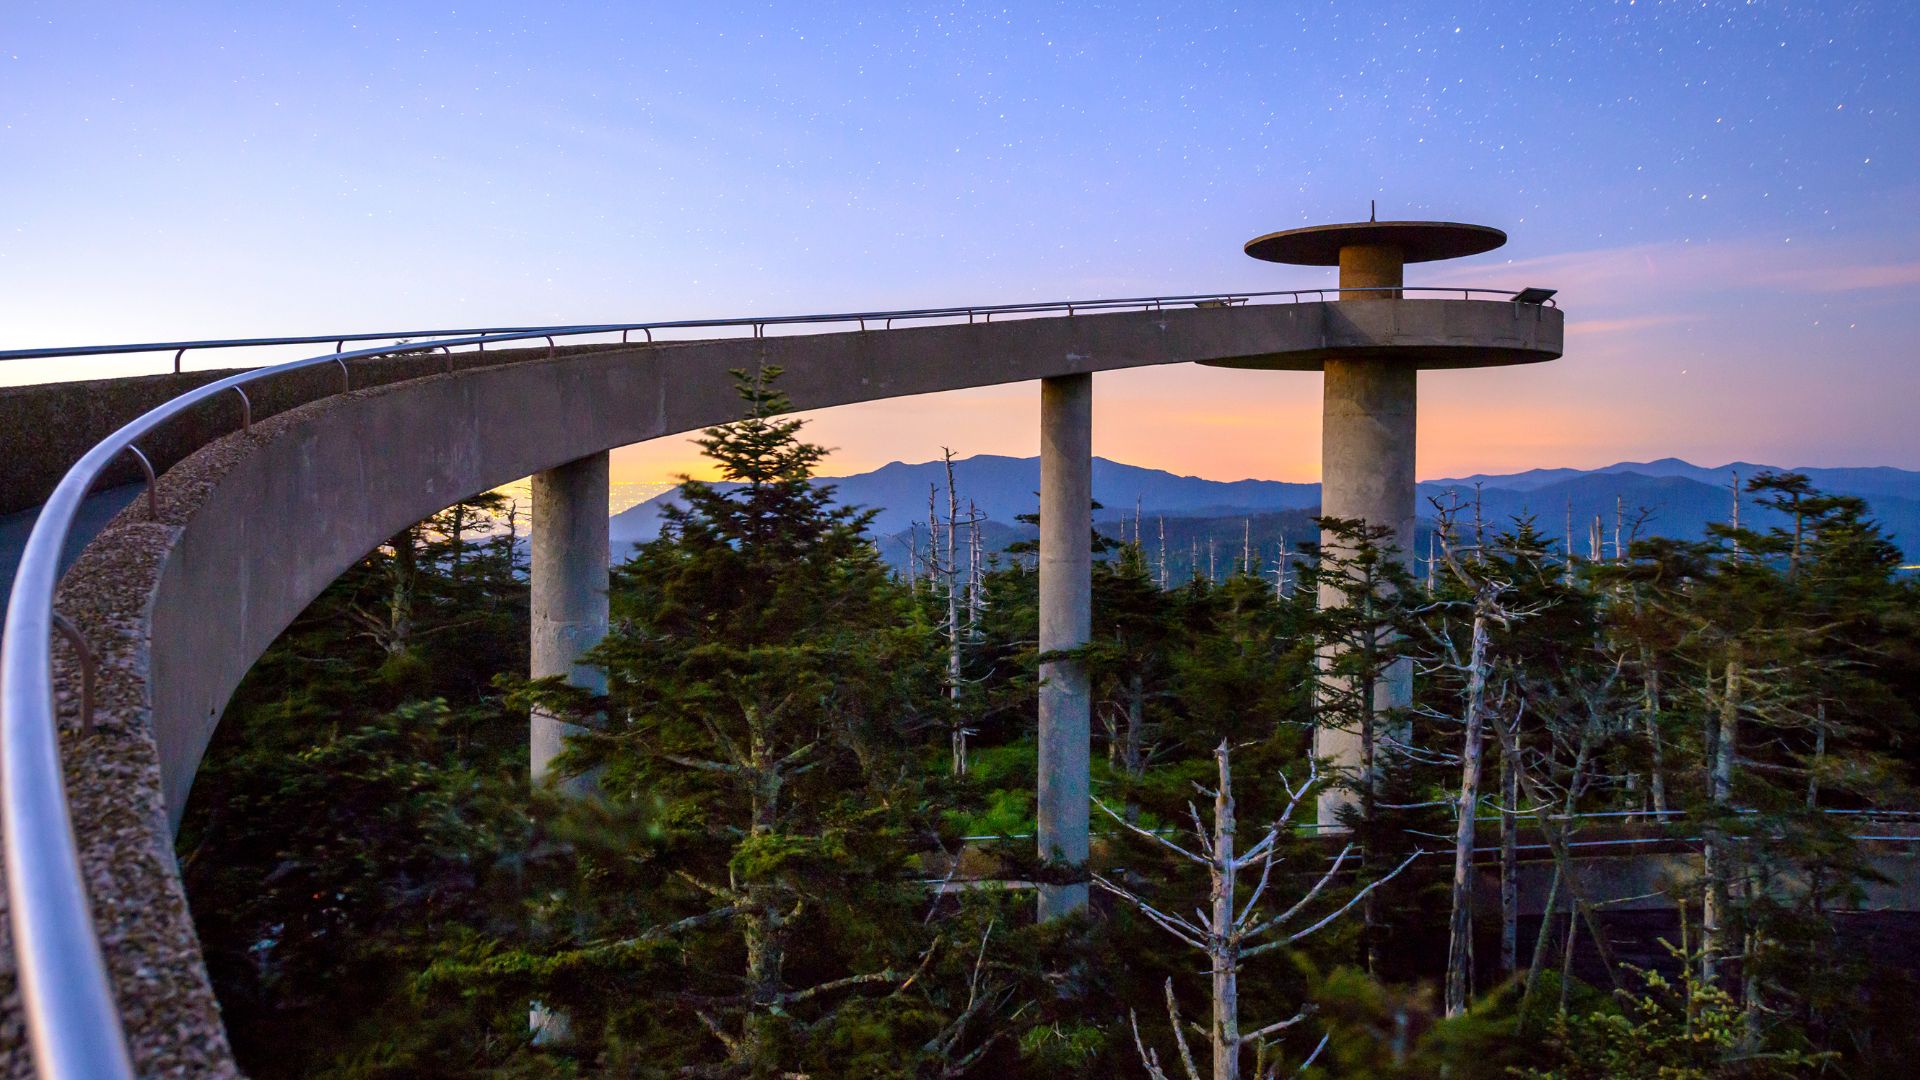 Clingman's Dome Great Smoky Mountains National Park